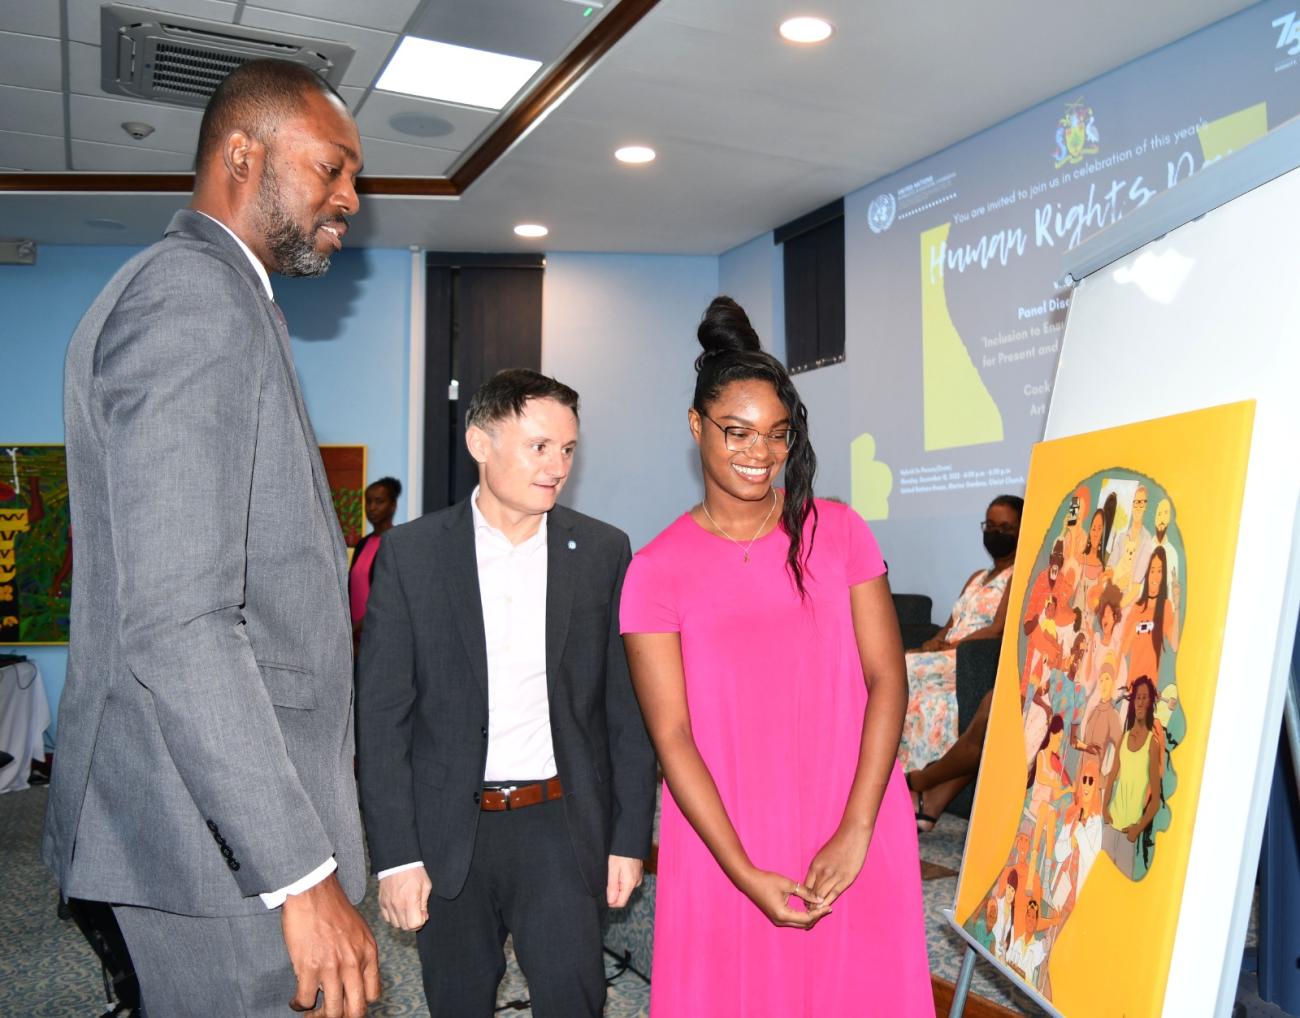 Minister of Labour, Social Security and the Third Sector, the Honourable Colin Jordan, UN Resident Coordinator for Barbados and the Eastern Caribbean, Didier Trebucq, and Painter, Alisha Smith, discuss her specially commissioned artwork during the 2022 Human Rights Day Event.